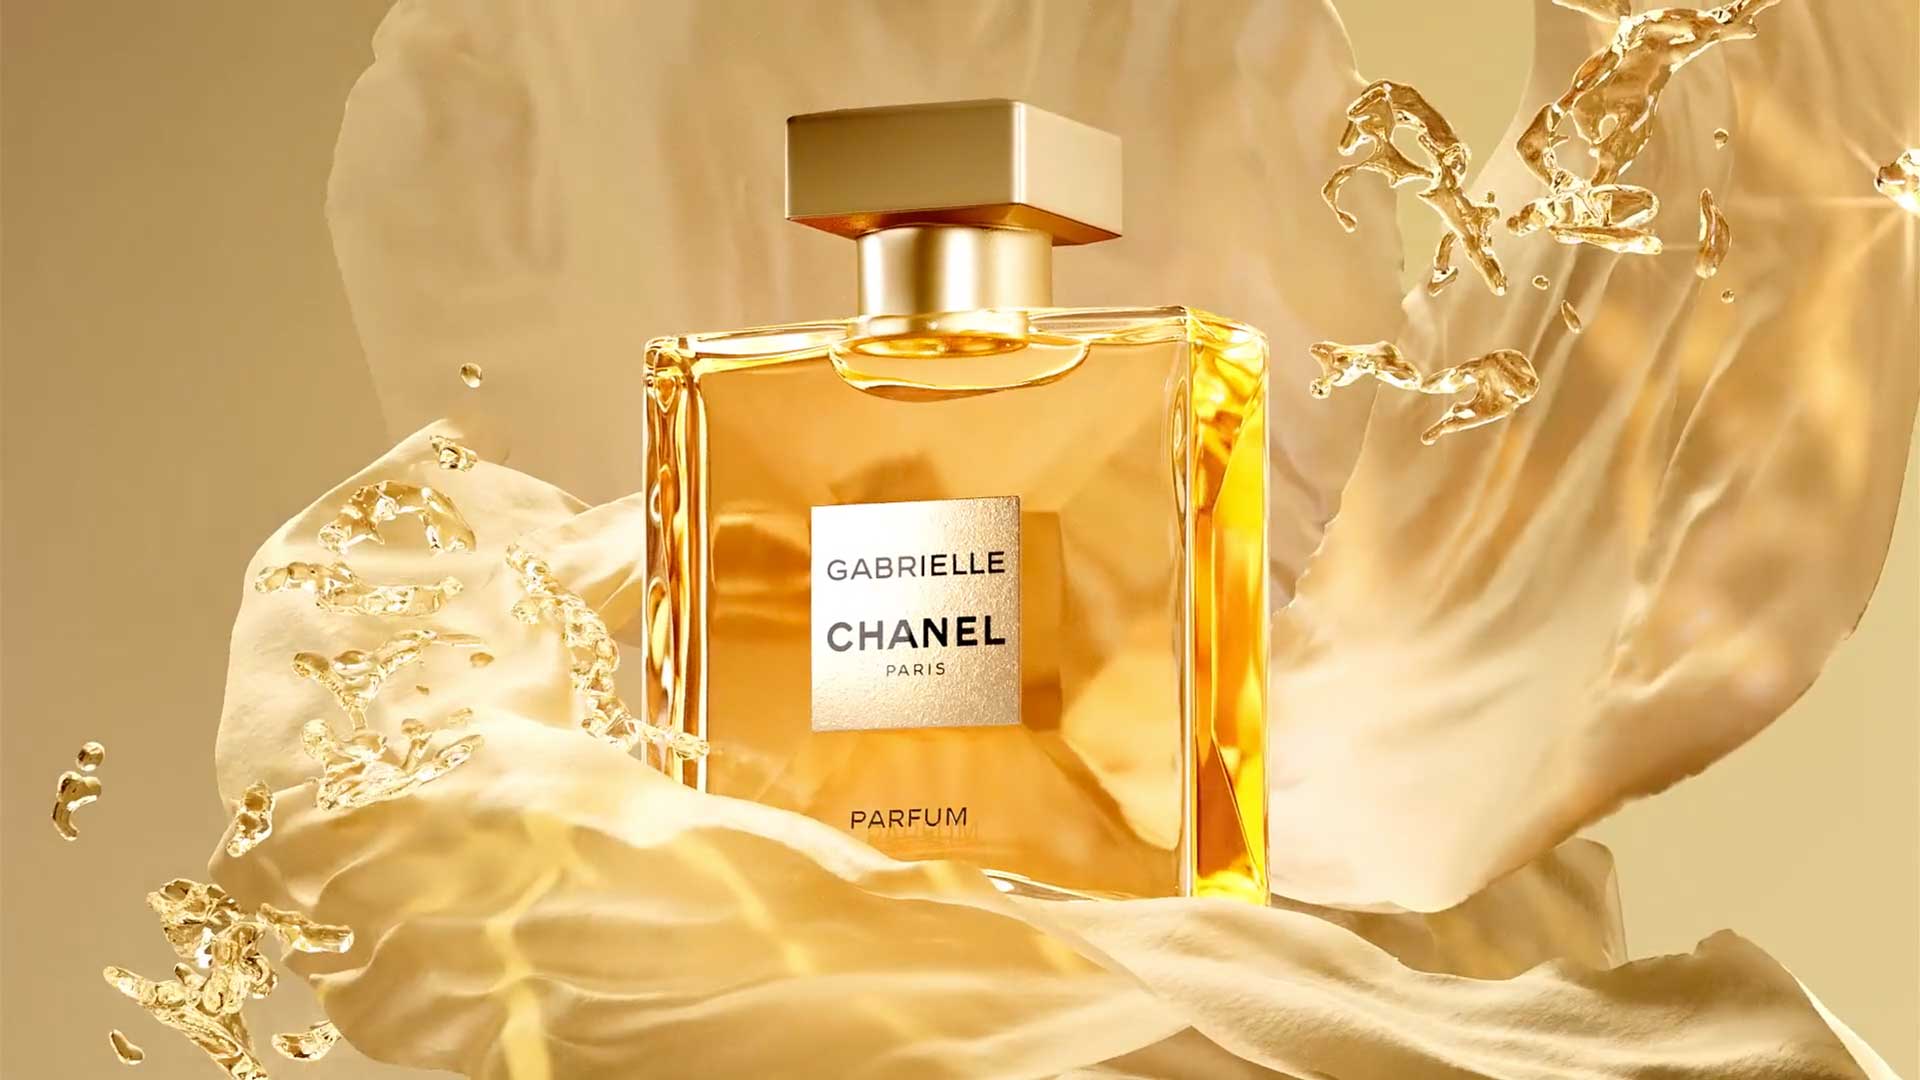 Builders Club Wraps Gabrielle Perfumes in All Kinds of Elegance for CHANEL  - Motion design - STASH : Motion design – STASH